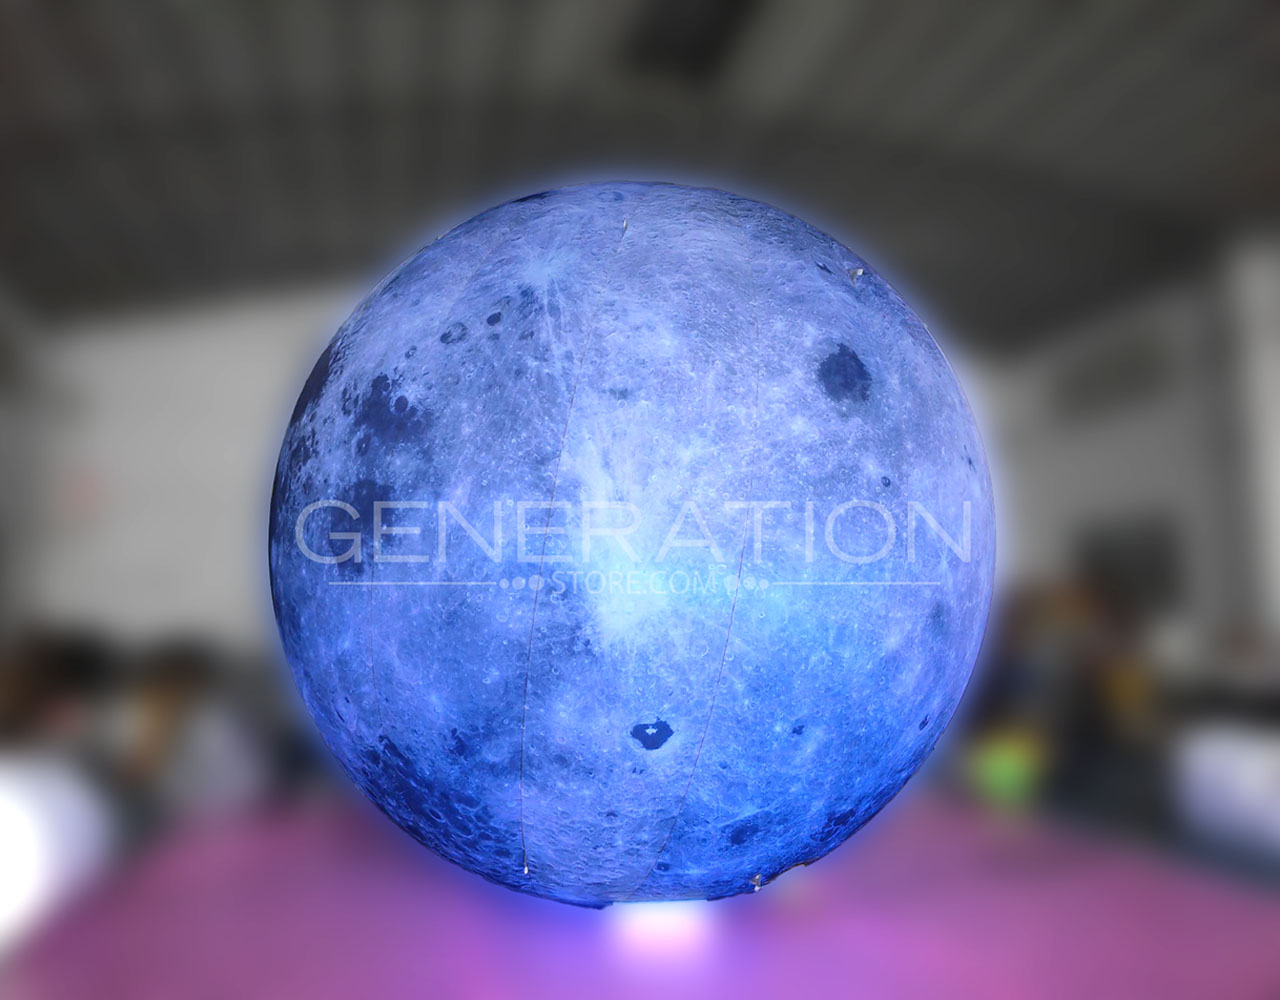 Show Your Clients You're Out of This World with Giant Inflatable Moon Balloons